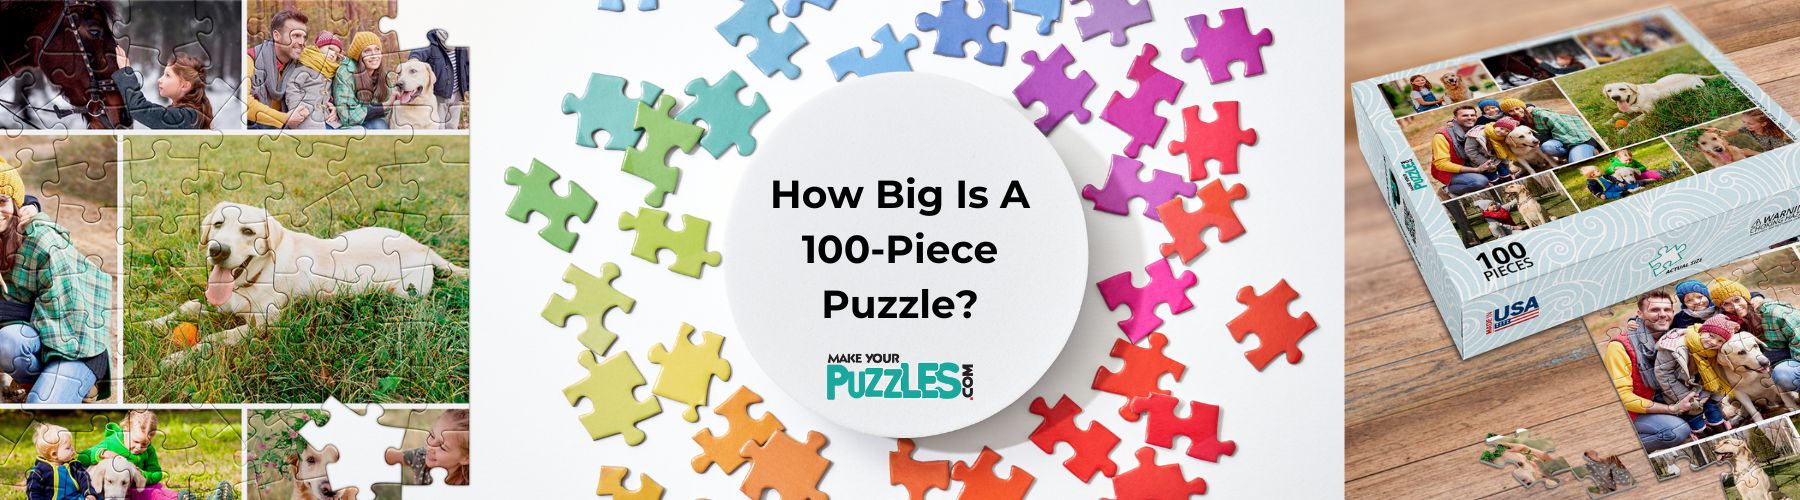 How Big Is a 100-Piece Puzzle?